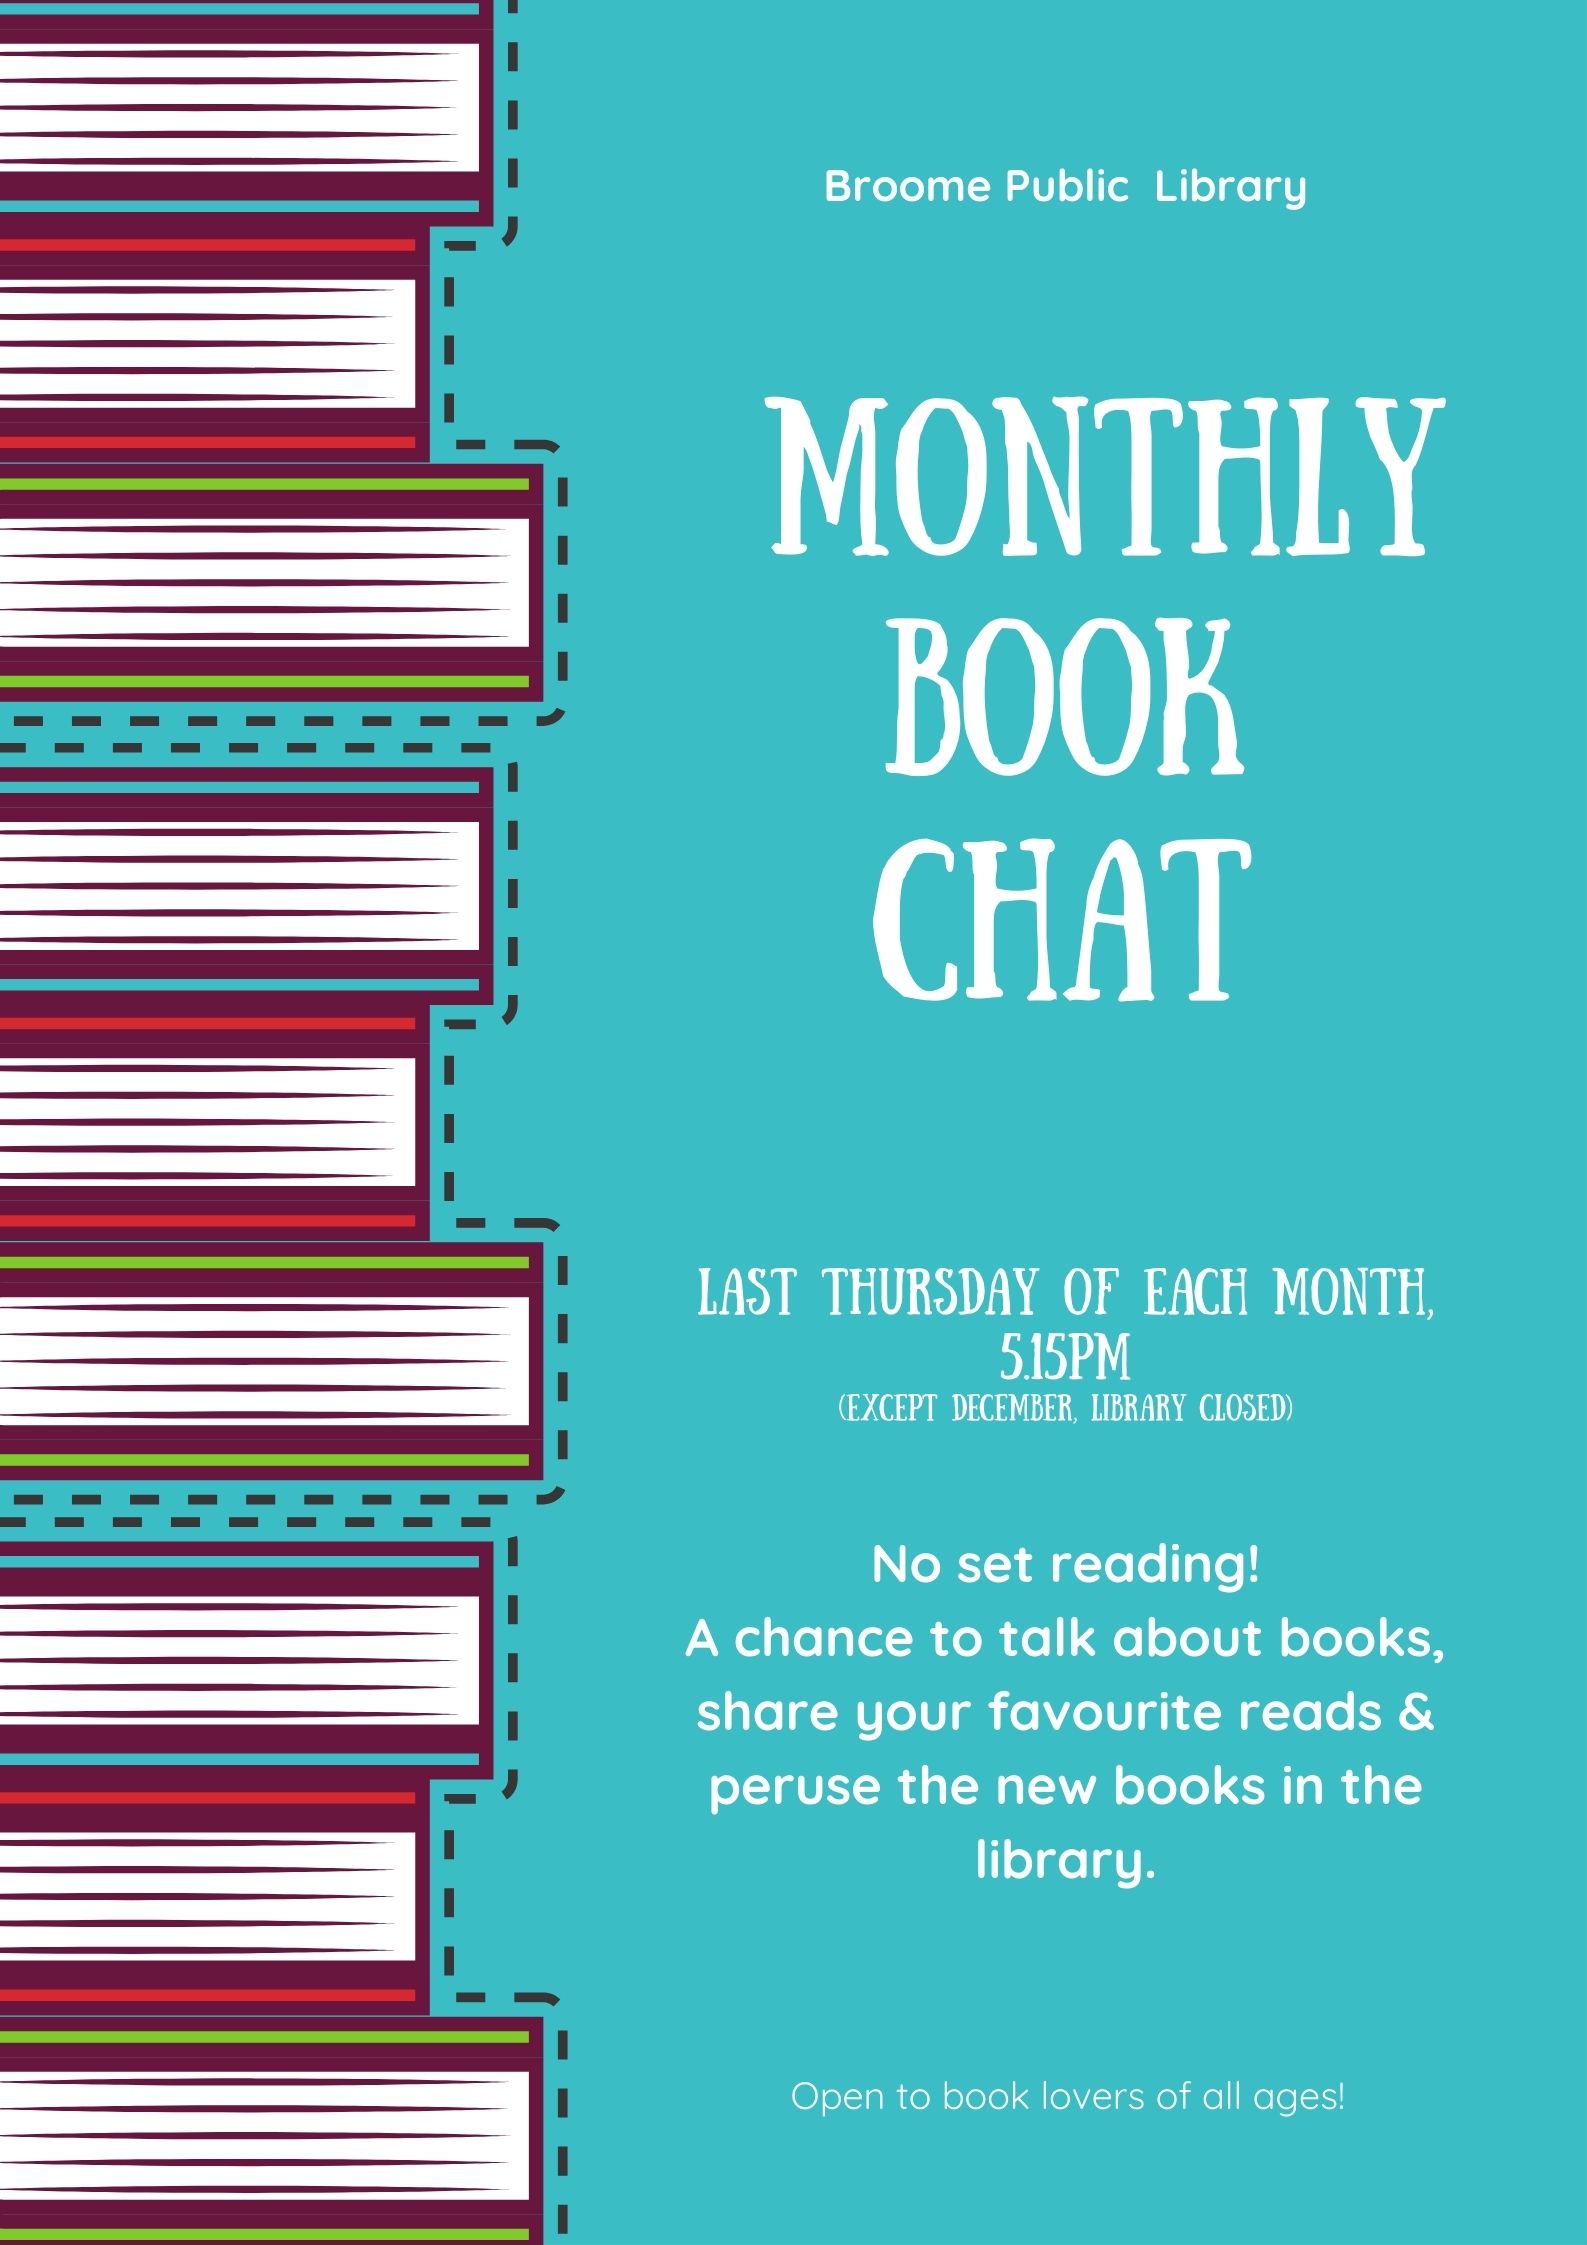 Monthly book chat flyer final 2021.jpg